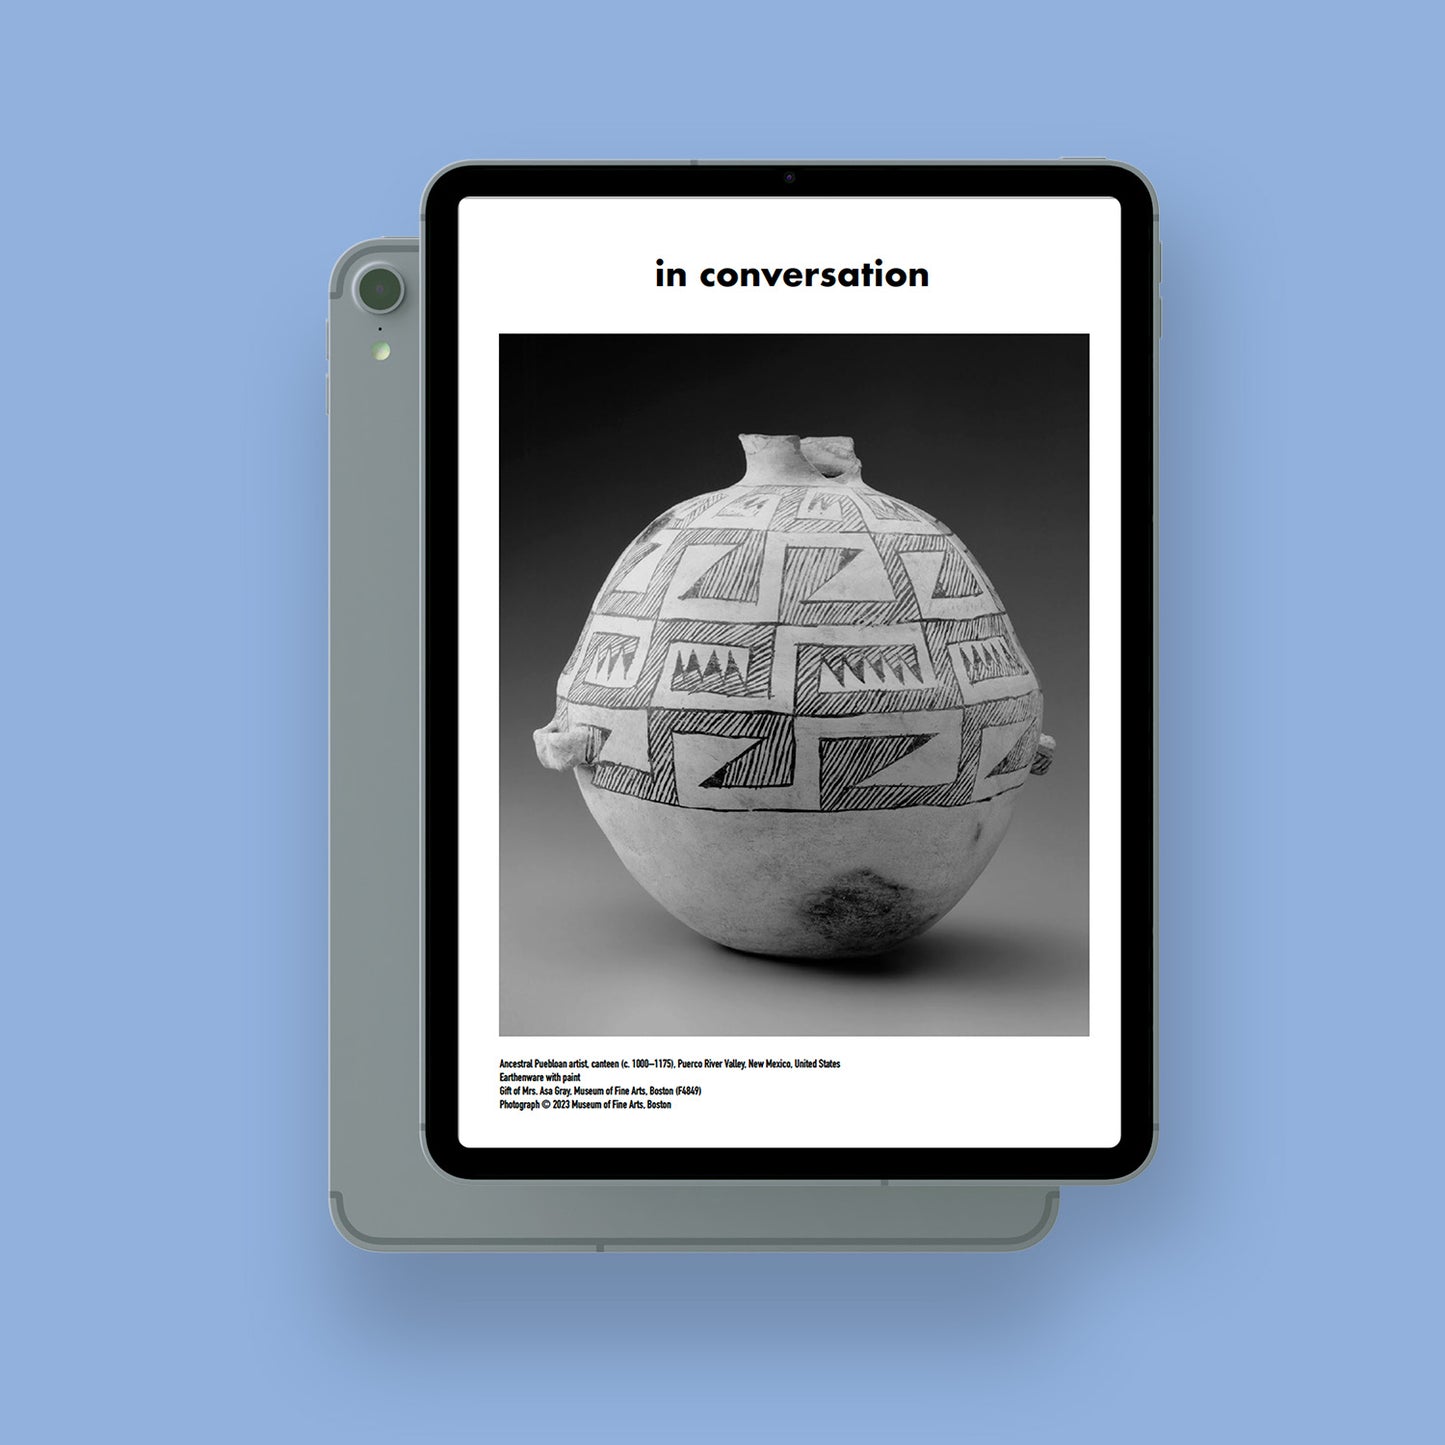 Mockup of a tablet with the digital version of Convergence #3. "in conversation" title page with an Ancestral Pueblo ceramic from the MFA Boston